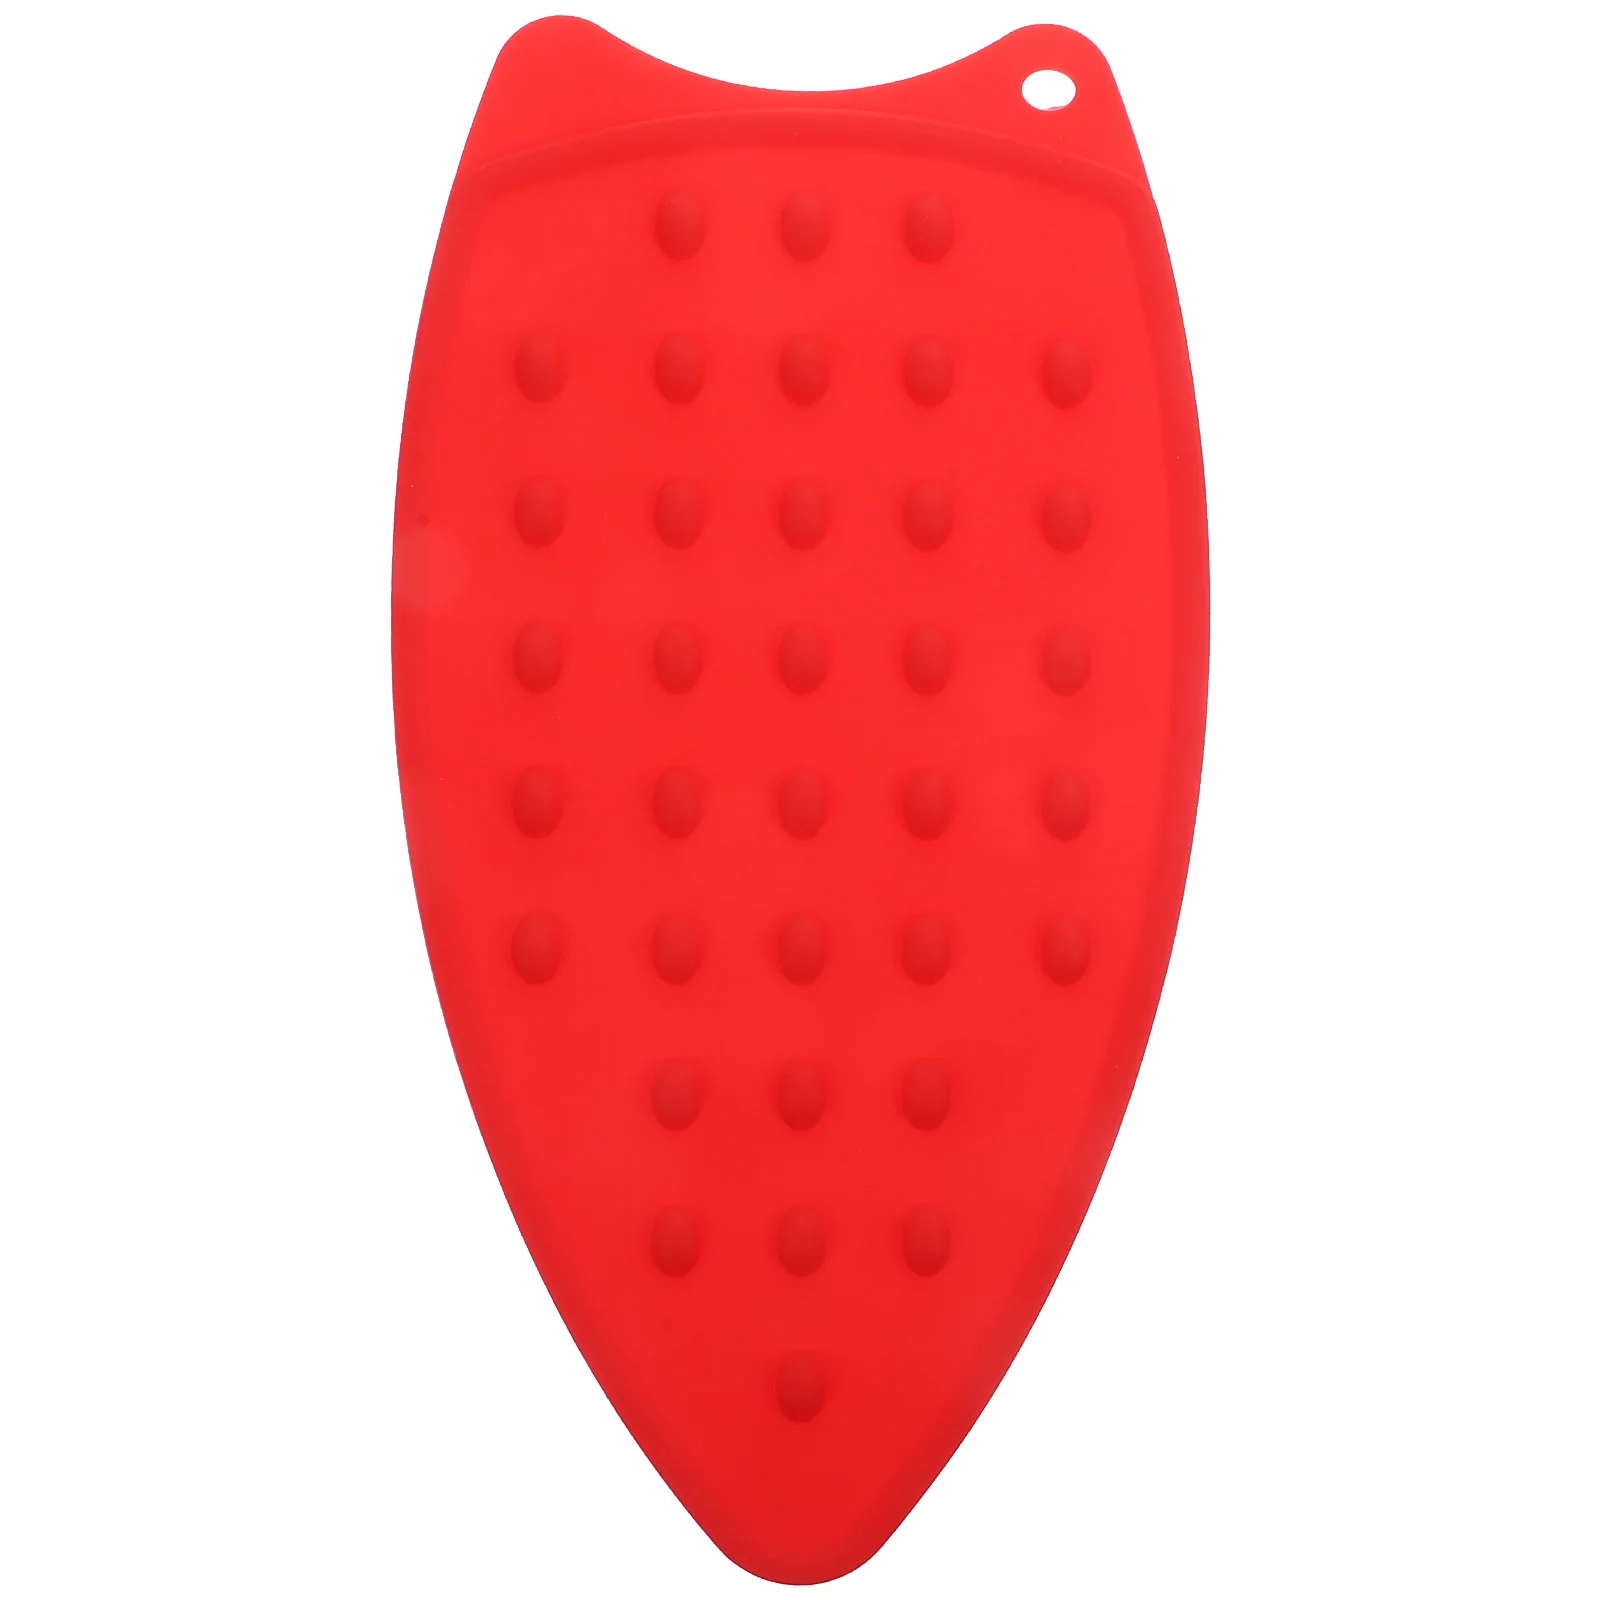 

Anti-scald Silicone Mat Protective Ironing Pad Tabletop Pot Practical Heat-resistant Plate Mats